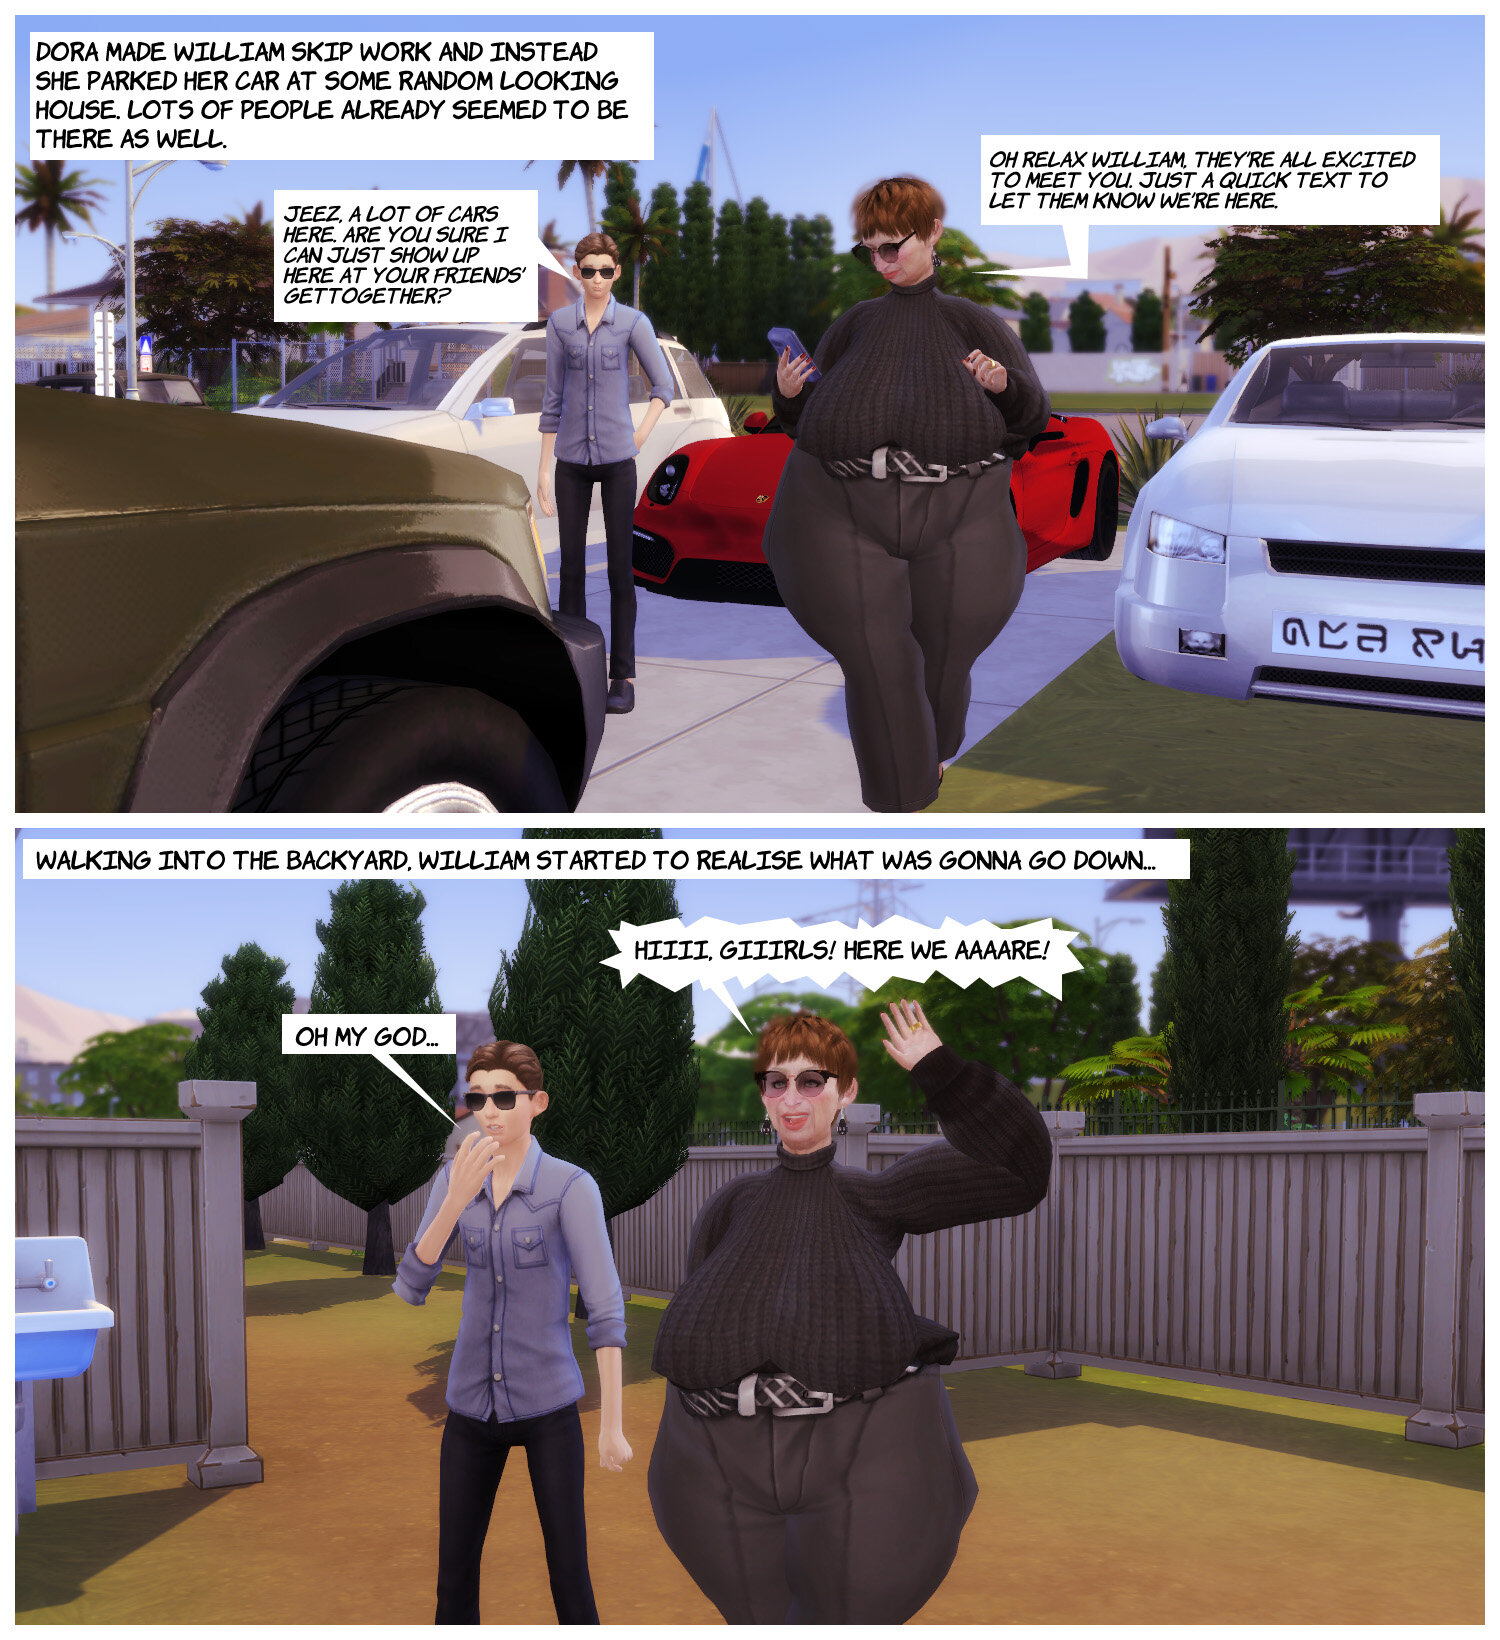 Bbw And Mature Sims Jimmy Reed And Friends Quest For Big Boobs And Butts Page 7 The Sims 4